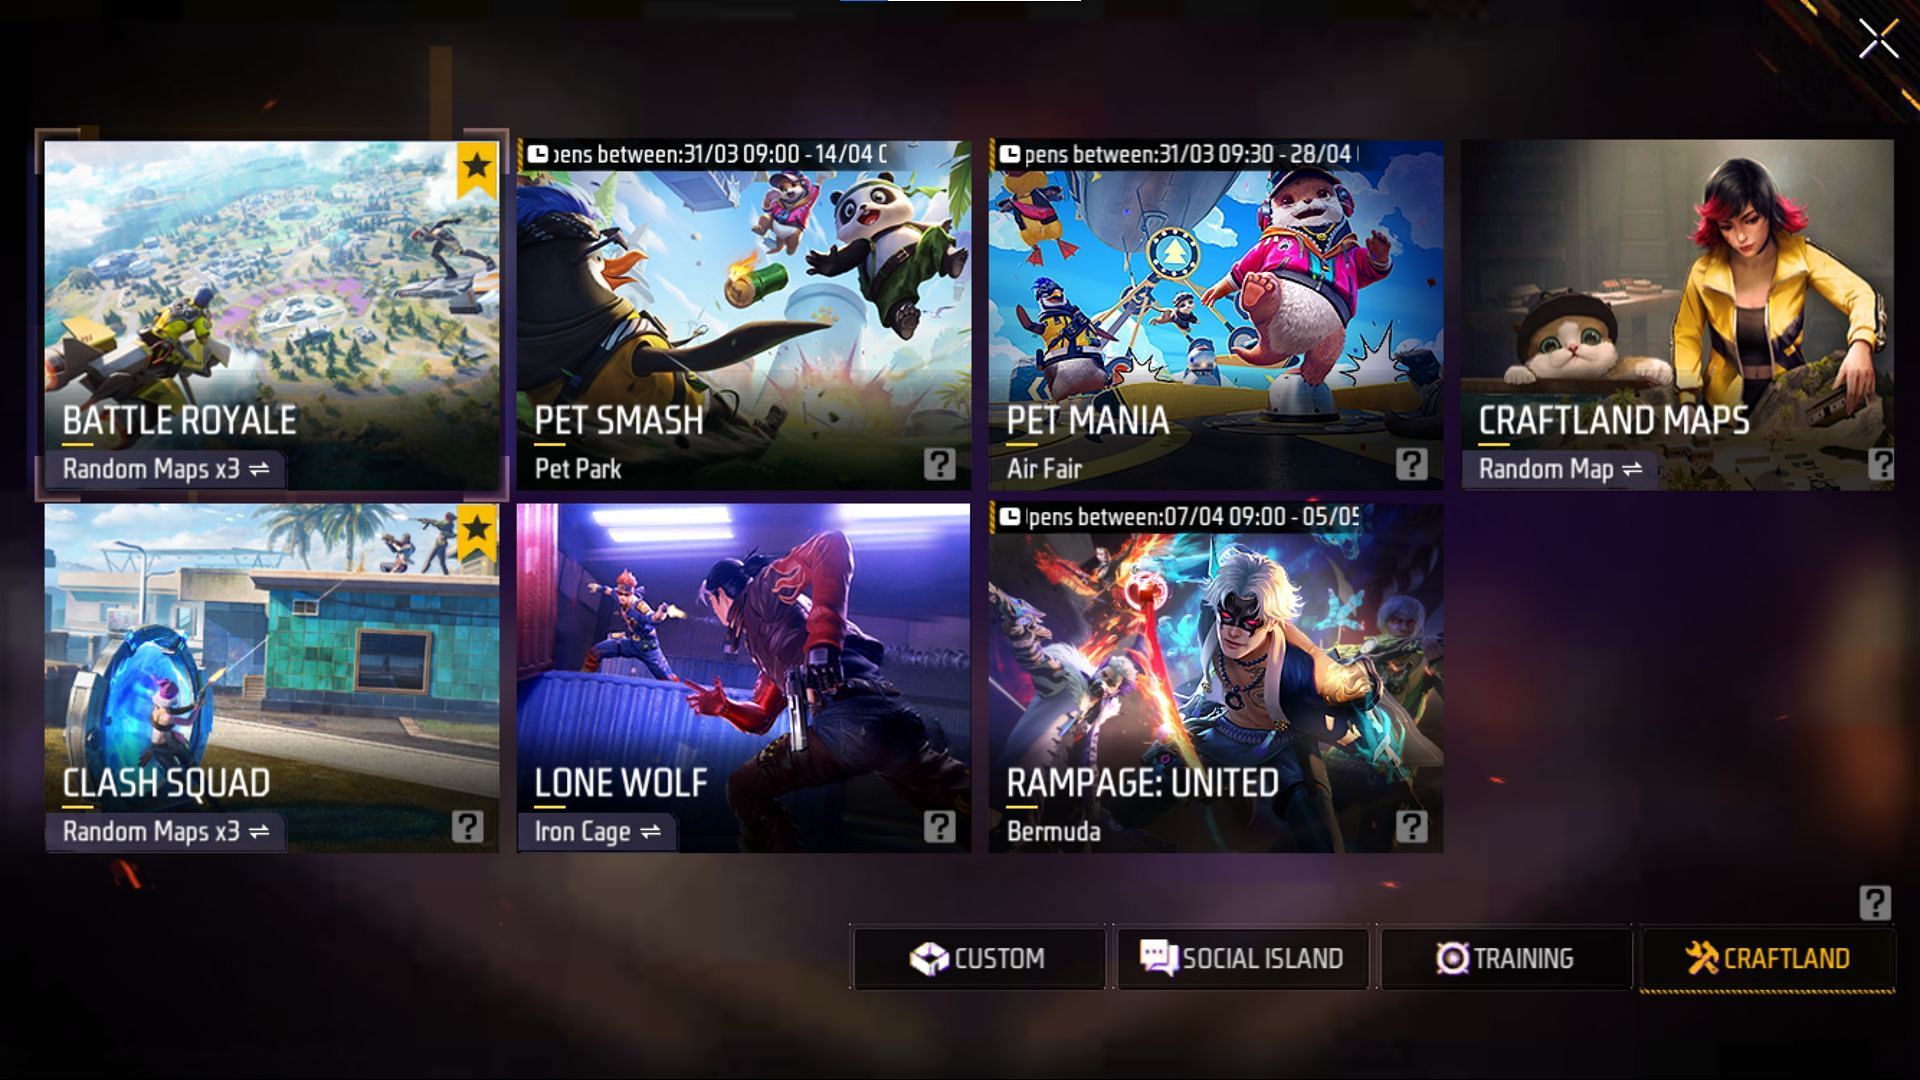 You can play any of the game modes in the battle royale (Image via Garena)